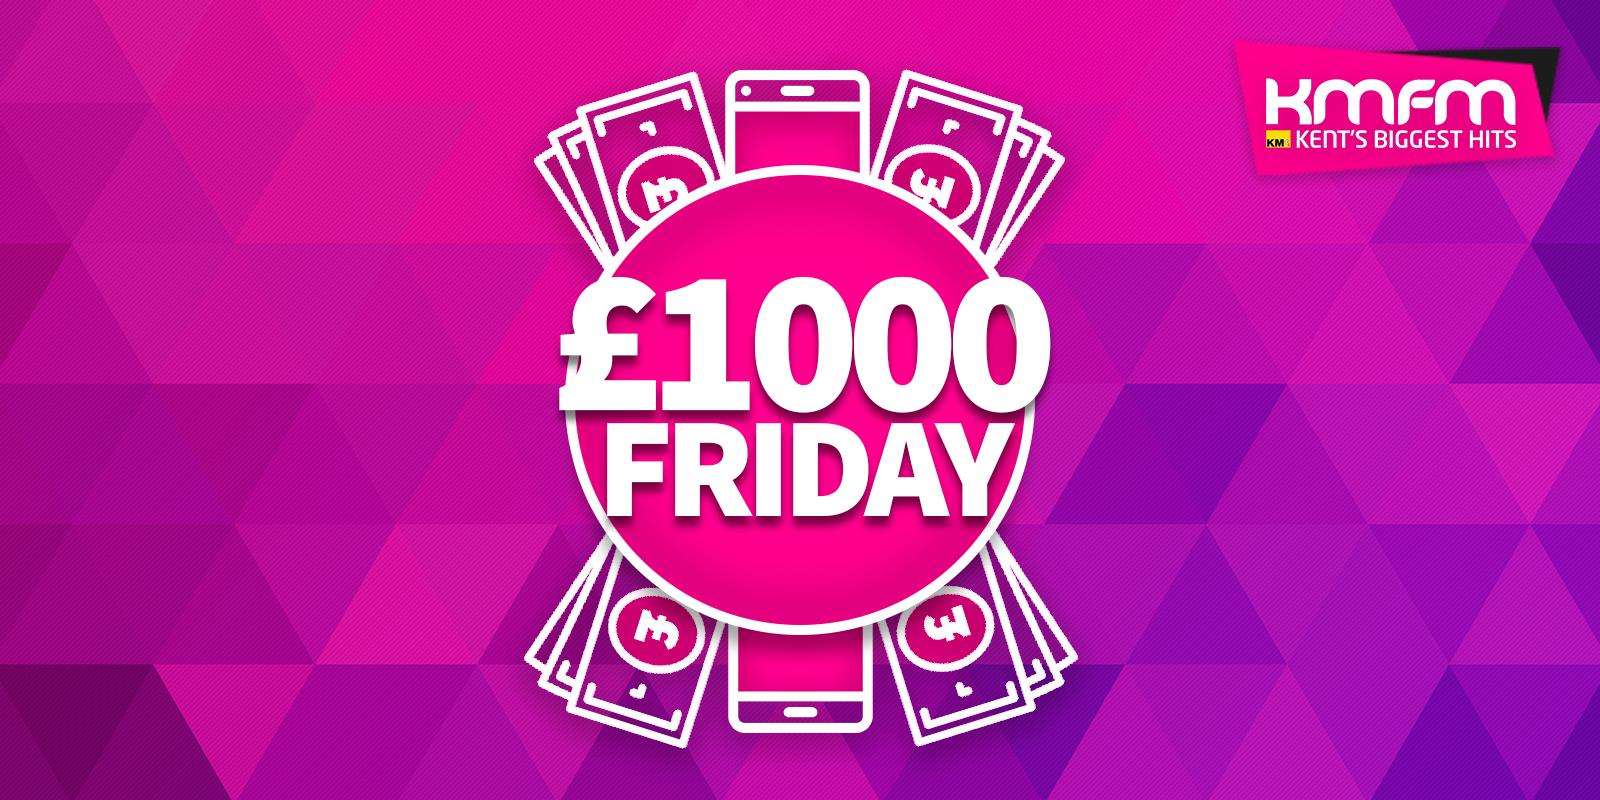 Thousand Pound Friday is on kmfm